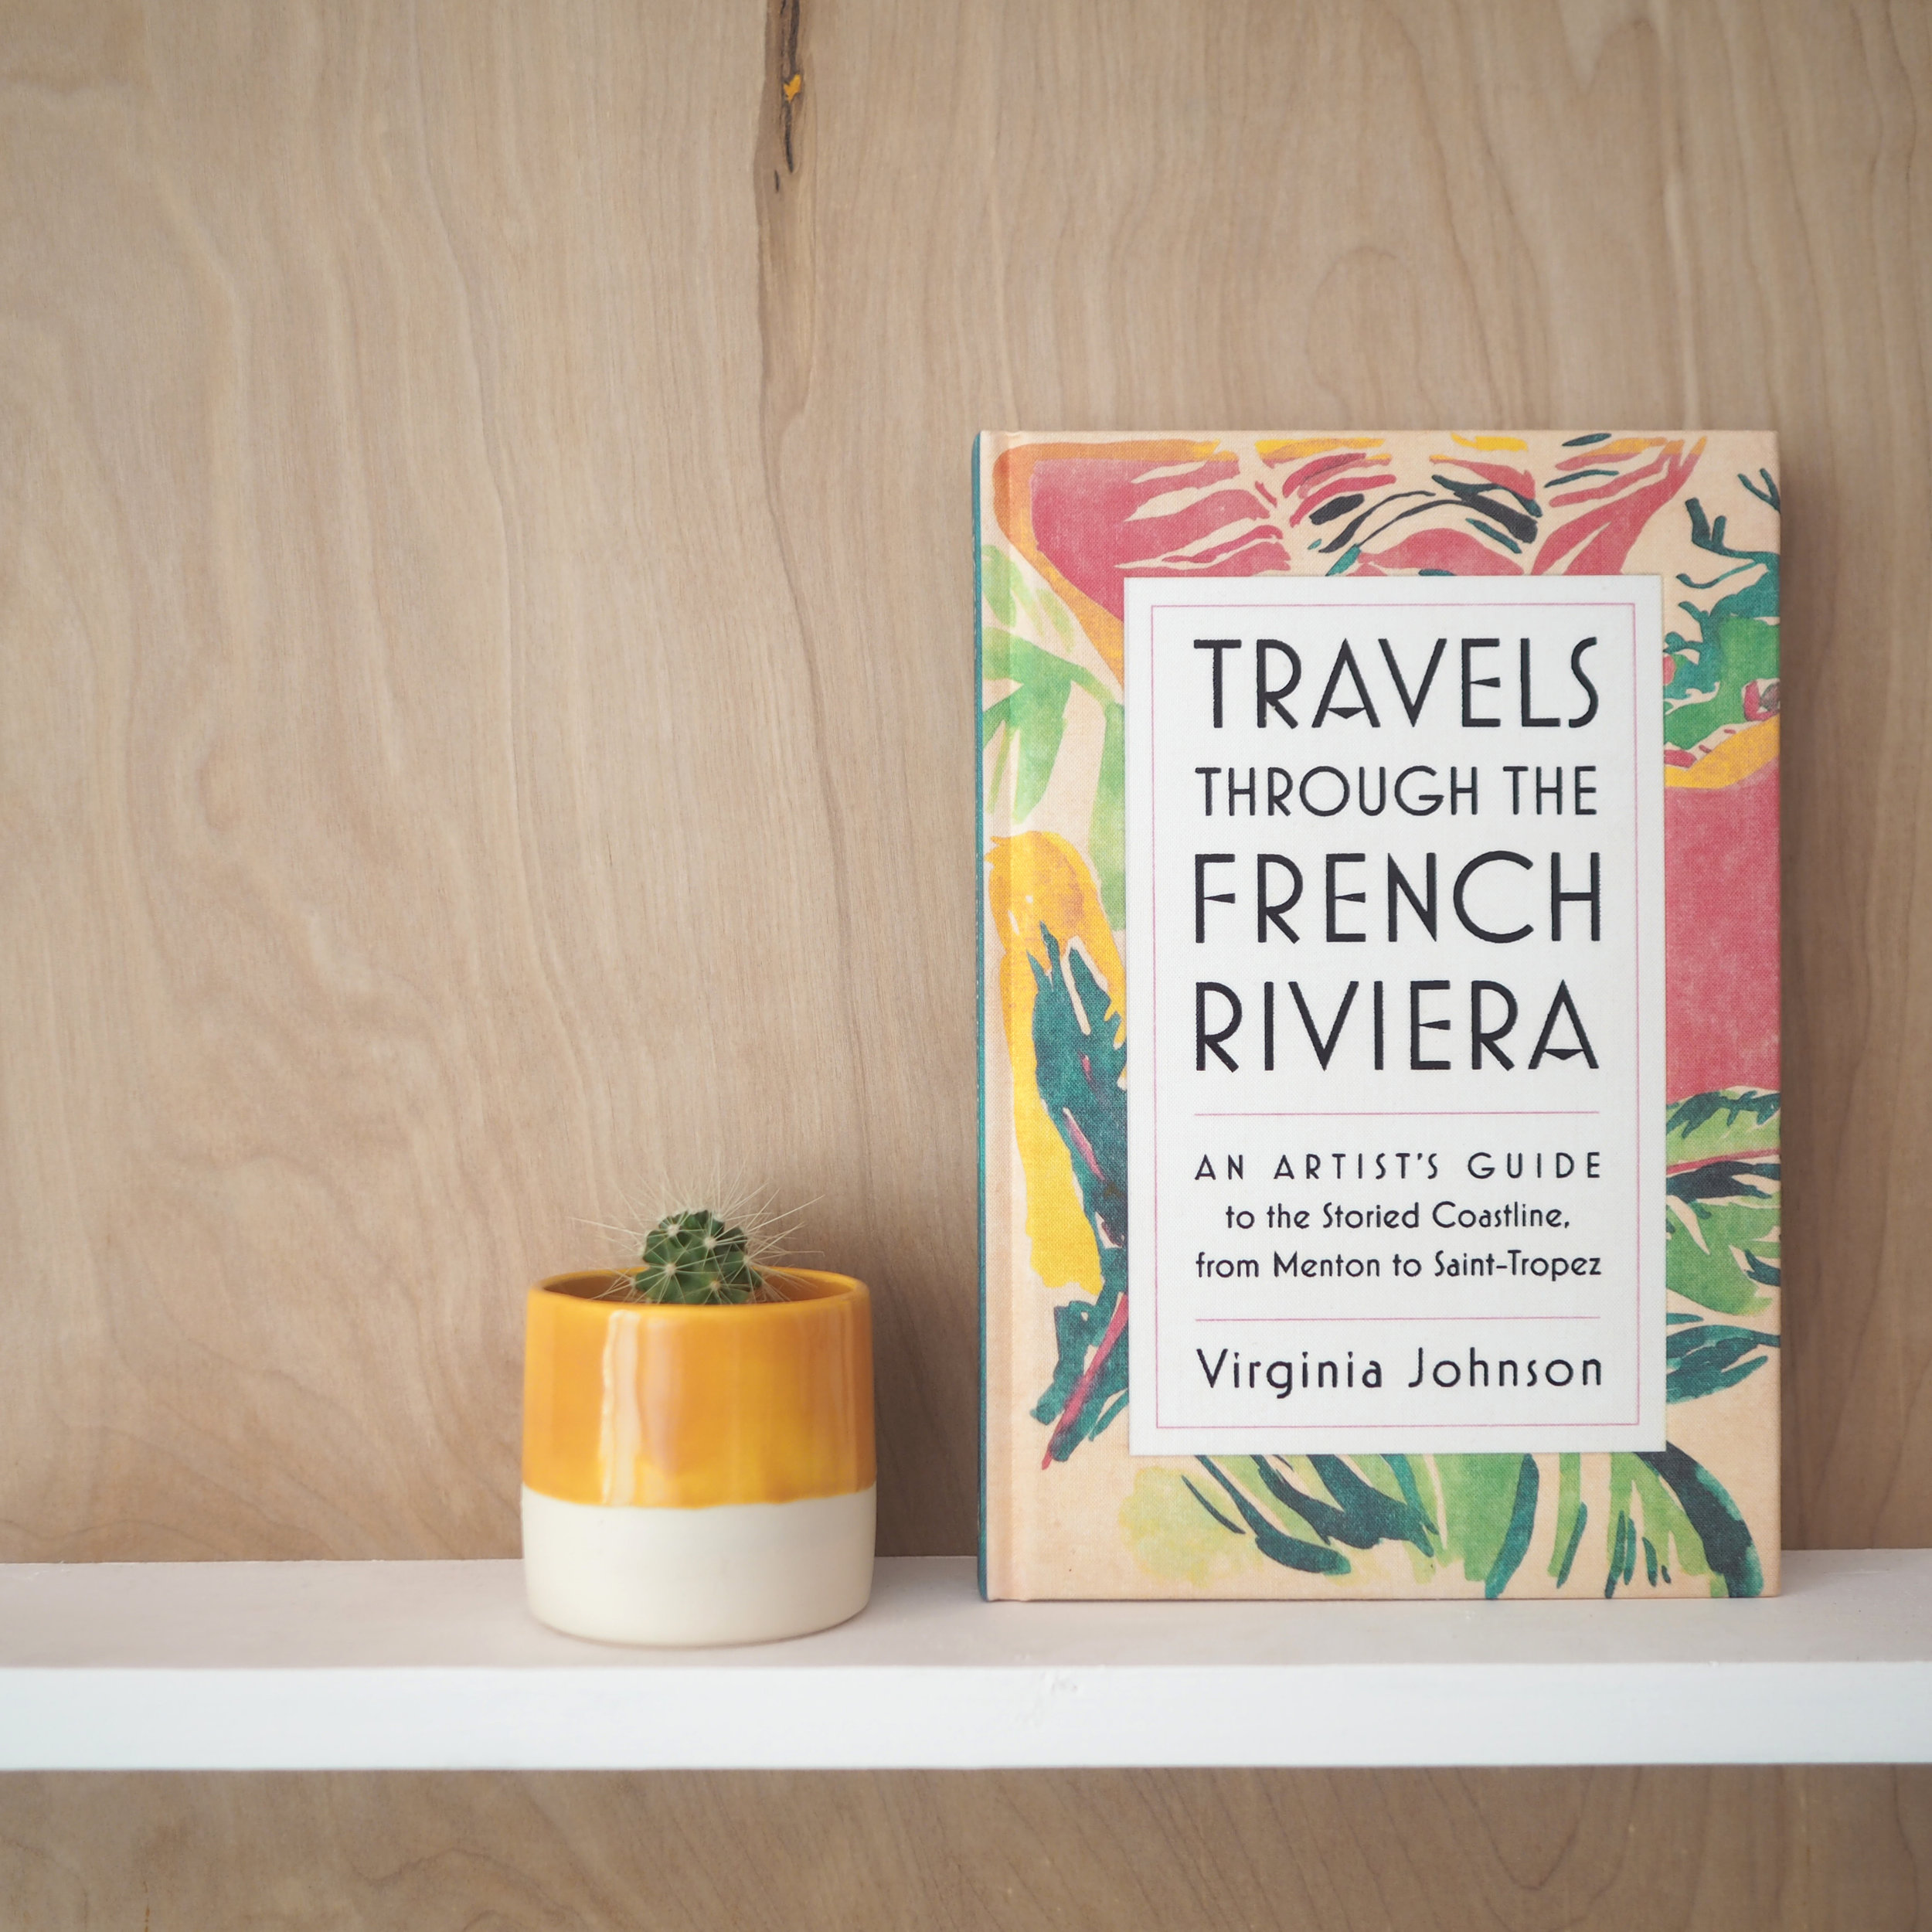 Travels through the French Riveria by Virginia Johnson